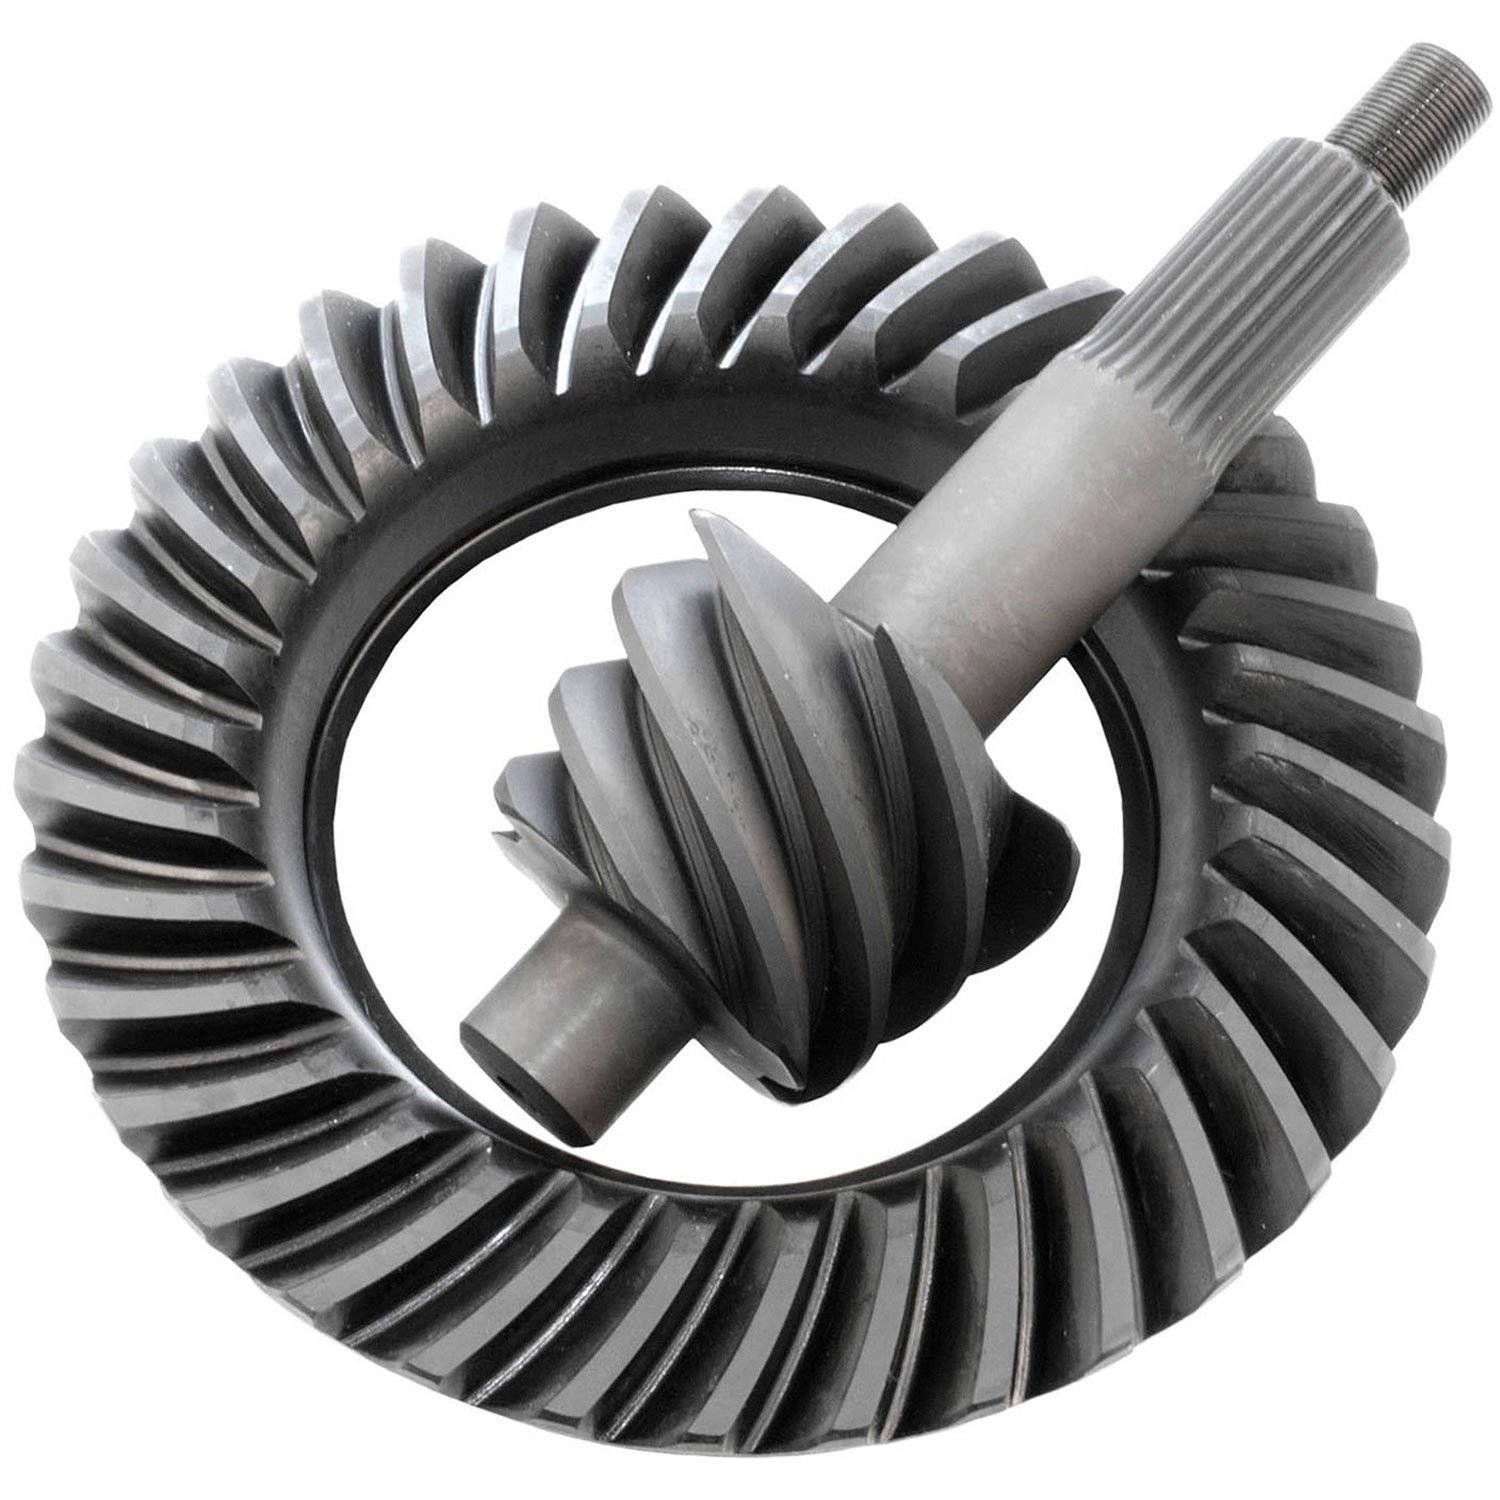 Ring & Pinion Gears Ford 9" (10 Bolt)